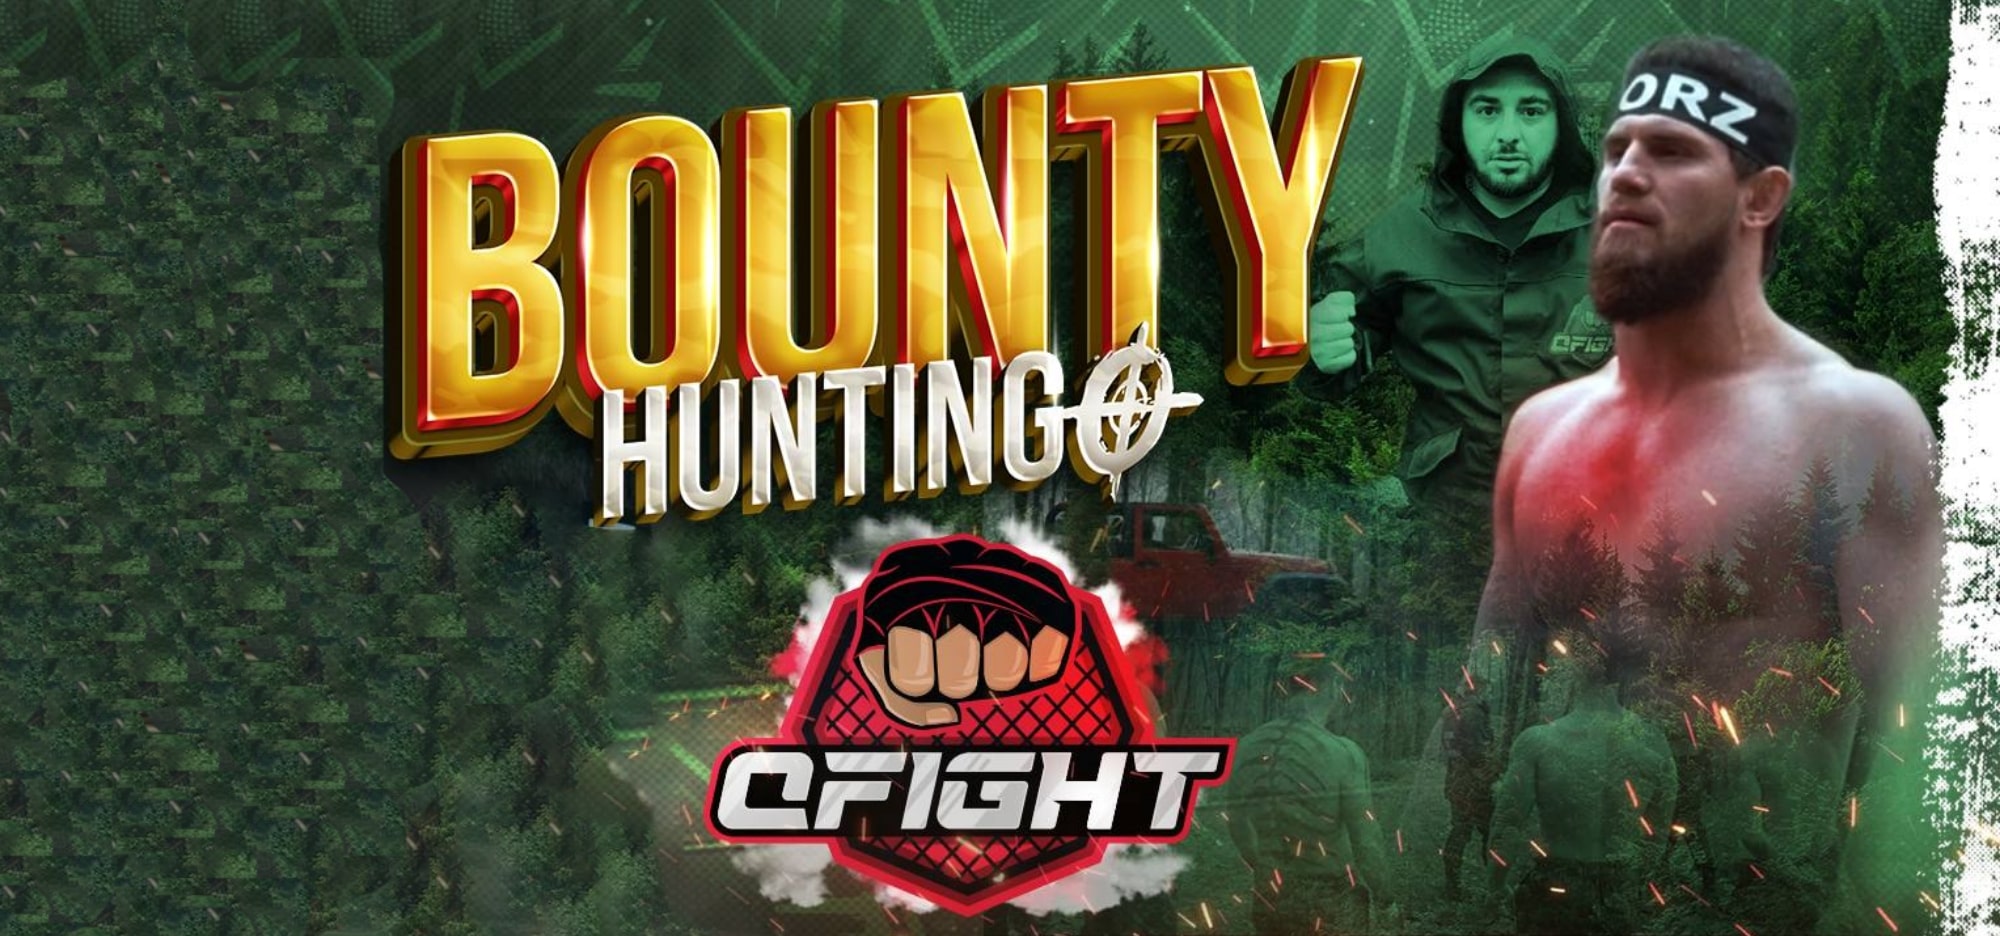 QFight is already here. Bounty hunting